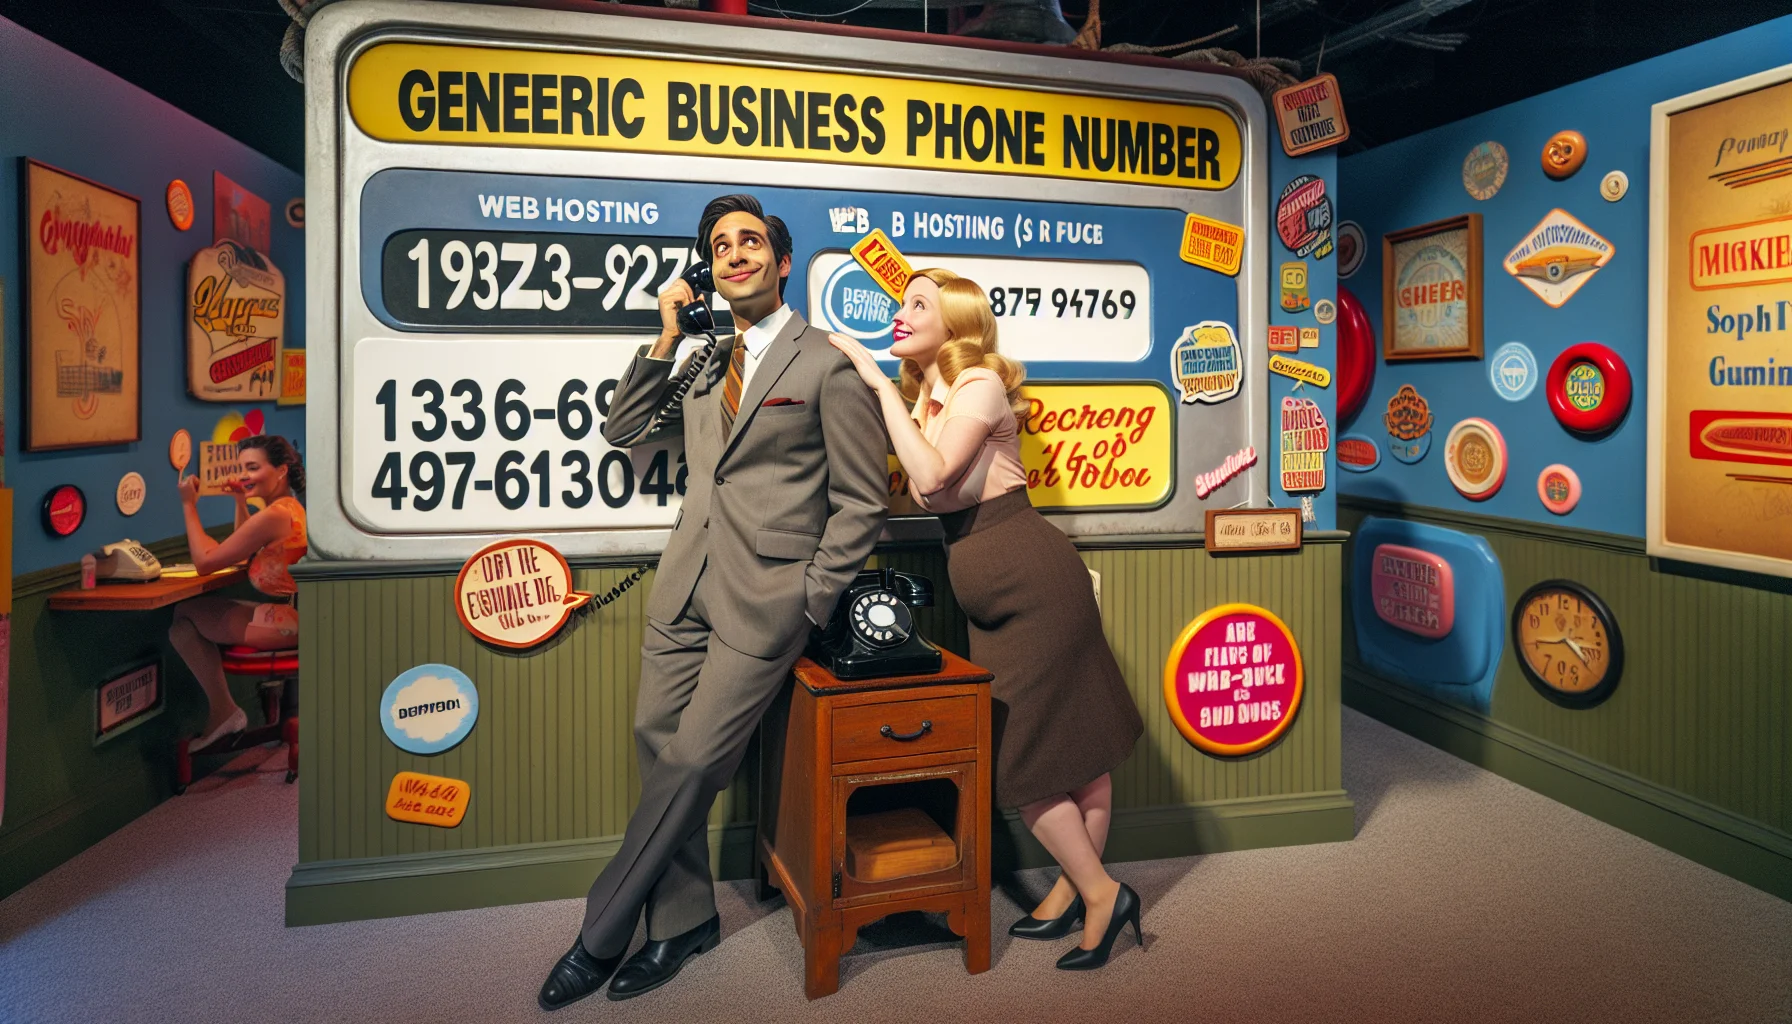 Visualize a whimsical scene showcasing a generic business phone number pinned up on the wall in a vibrant, bustling office environment dedicated to web hosting. Promote an air of enthusiasm and allure, as the employees, a blonde caucasian woman and a South Asian man with a neat, short haircut, share a playful moment. The surrounding space is filled with comedic web hosting-themed stickers and posters. Additionally, incorporate exaggerated features like a gigantic vintage telephone or humorous website designs hanging on the walls to fuel the comical ambiance.